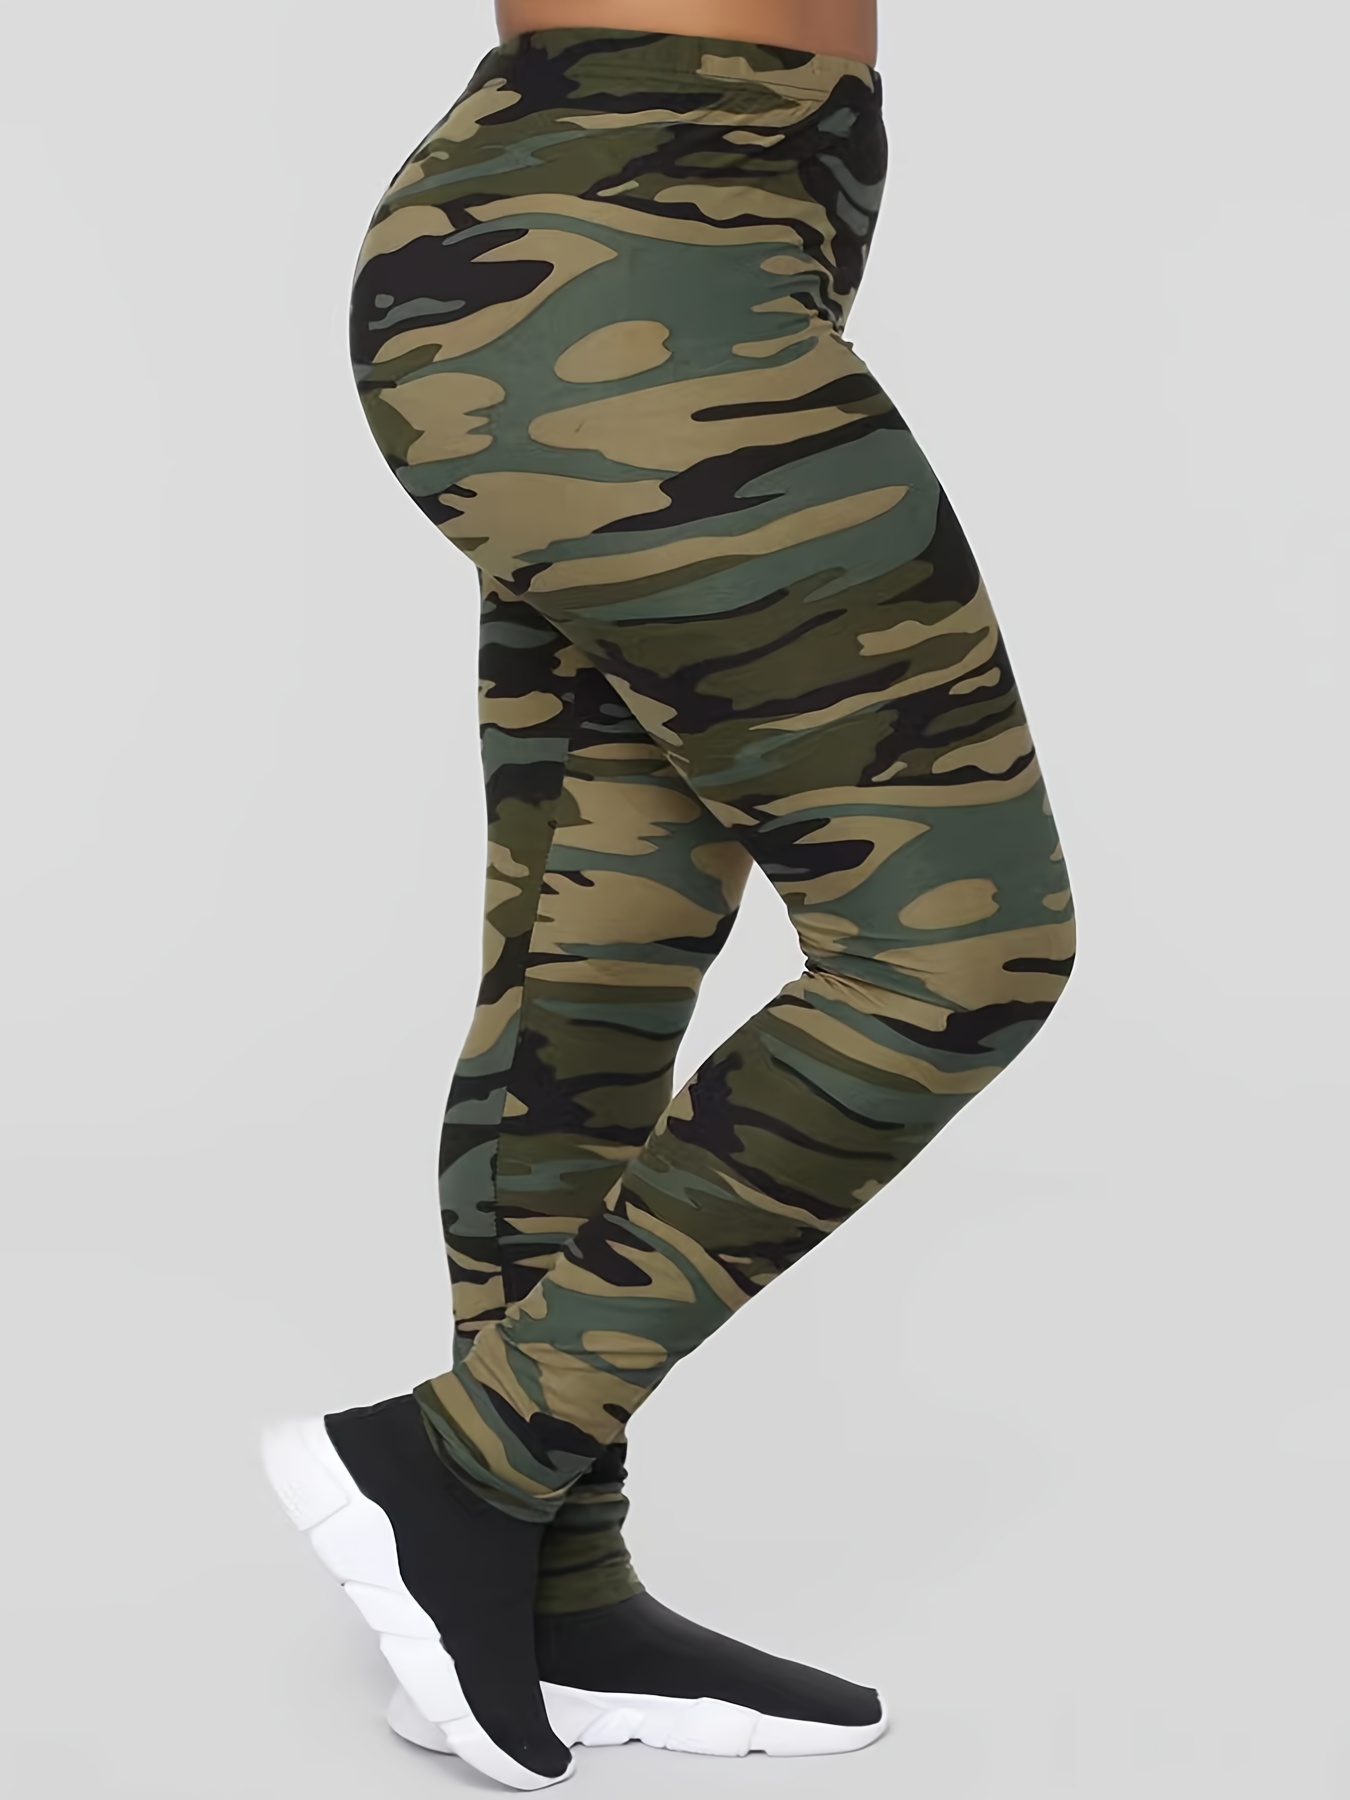 Girls Leggings in Camouflage Green (8 to 20 years) Camo by Stitch